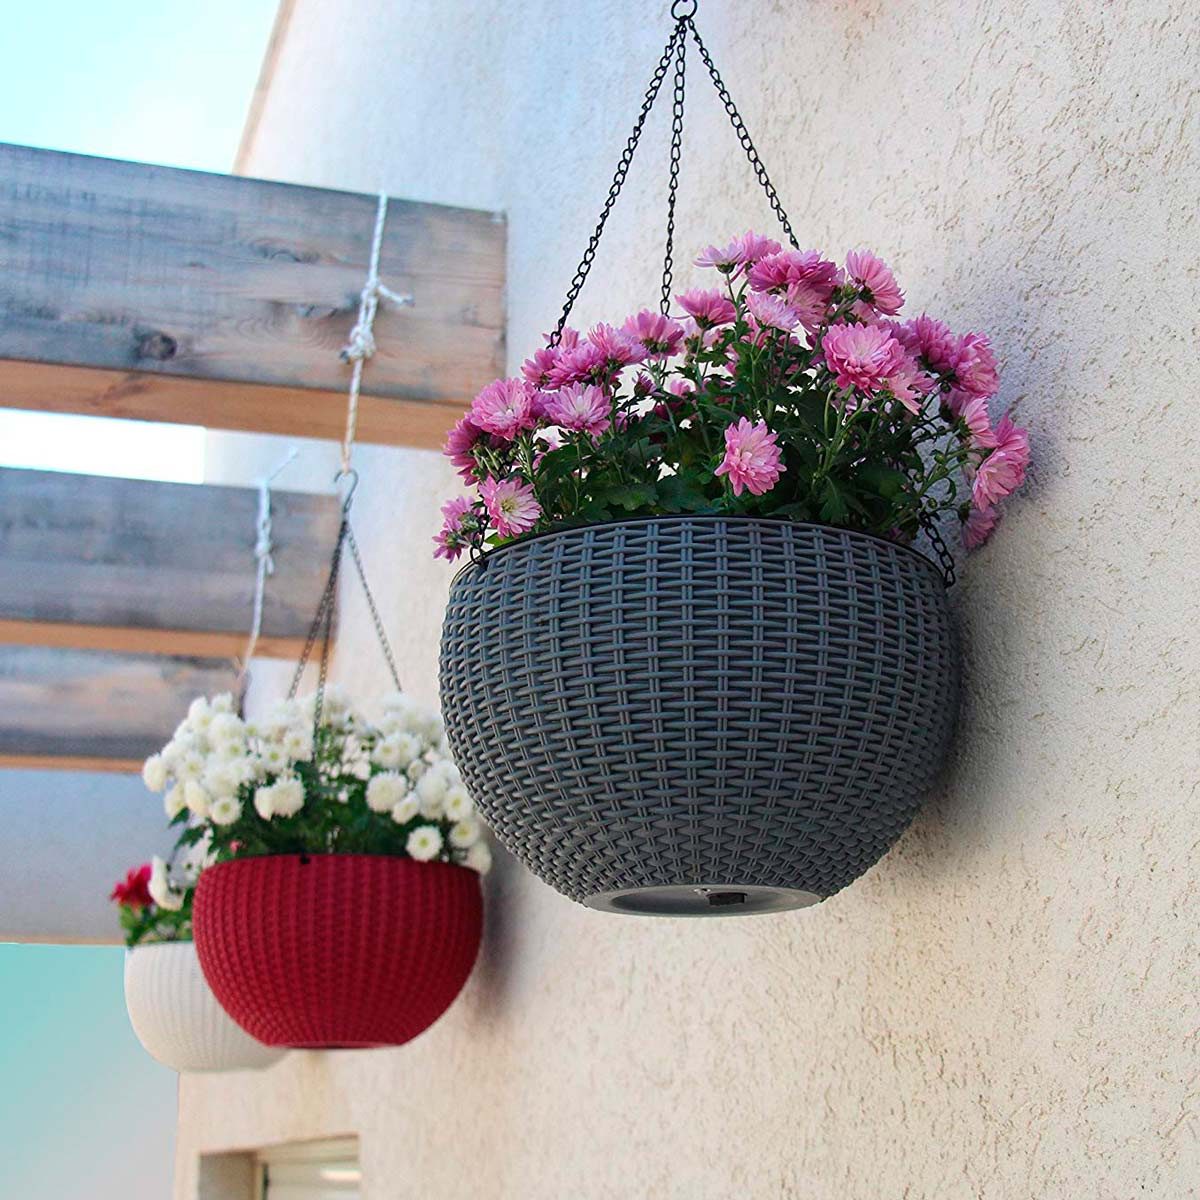 How To Water Outdoor Hanging Plants